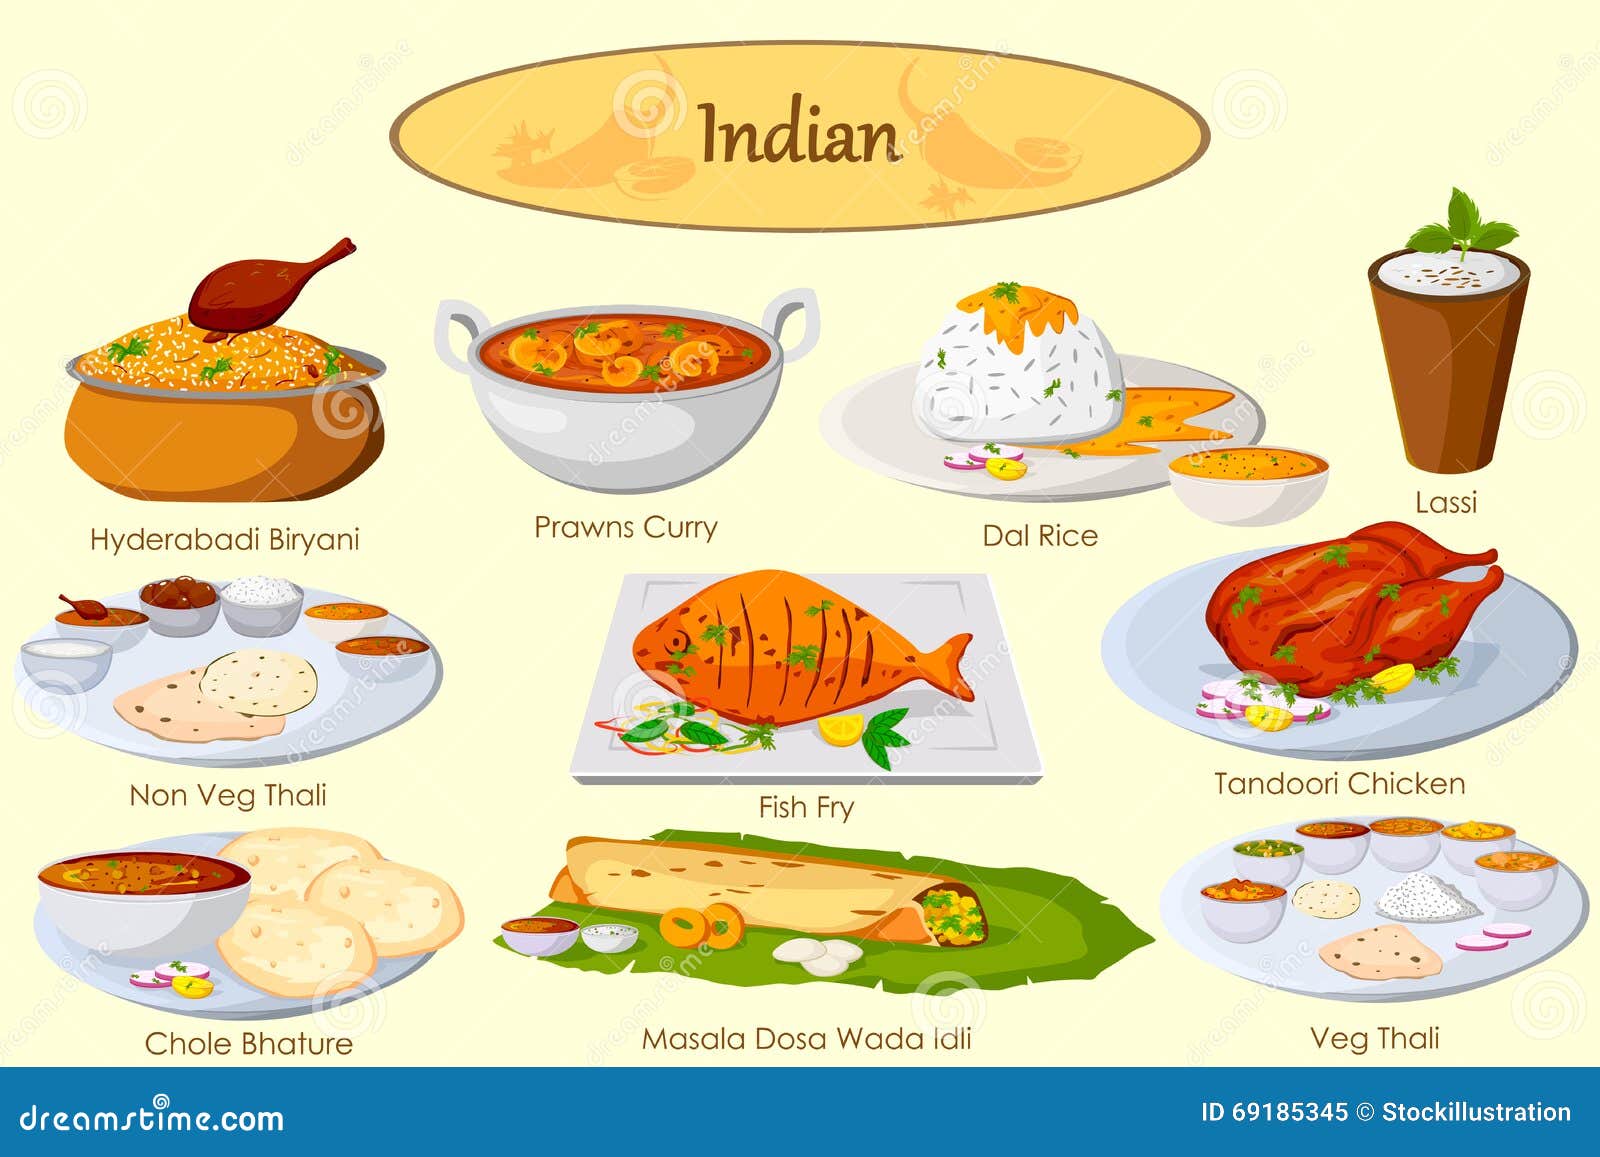 indian clipart collection free download - photo #39